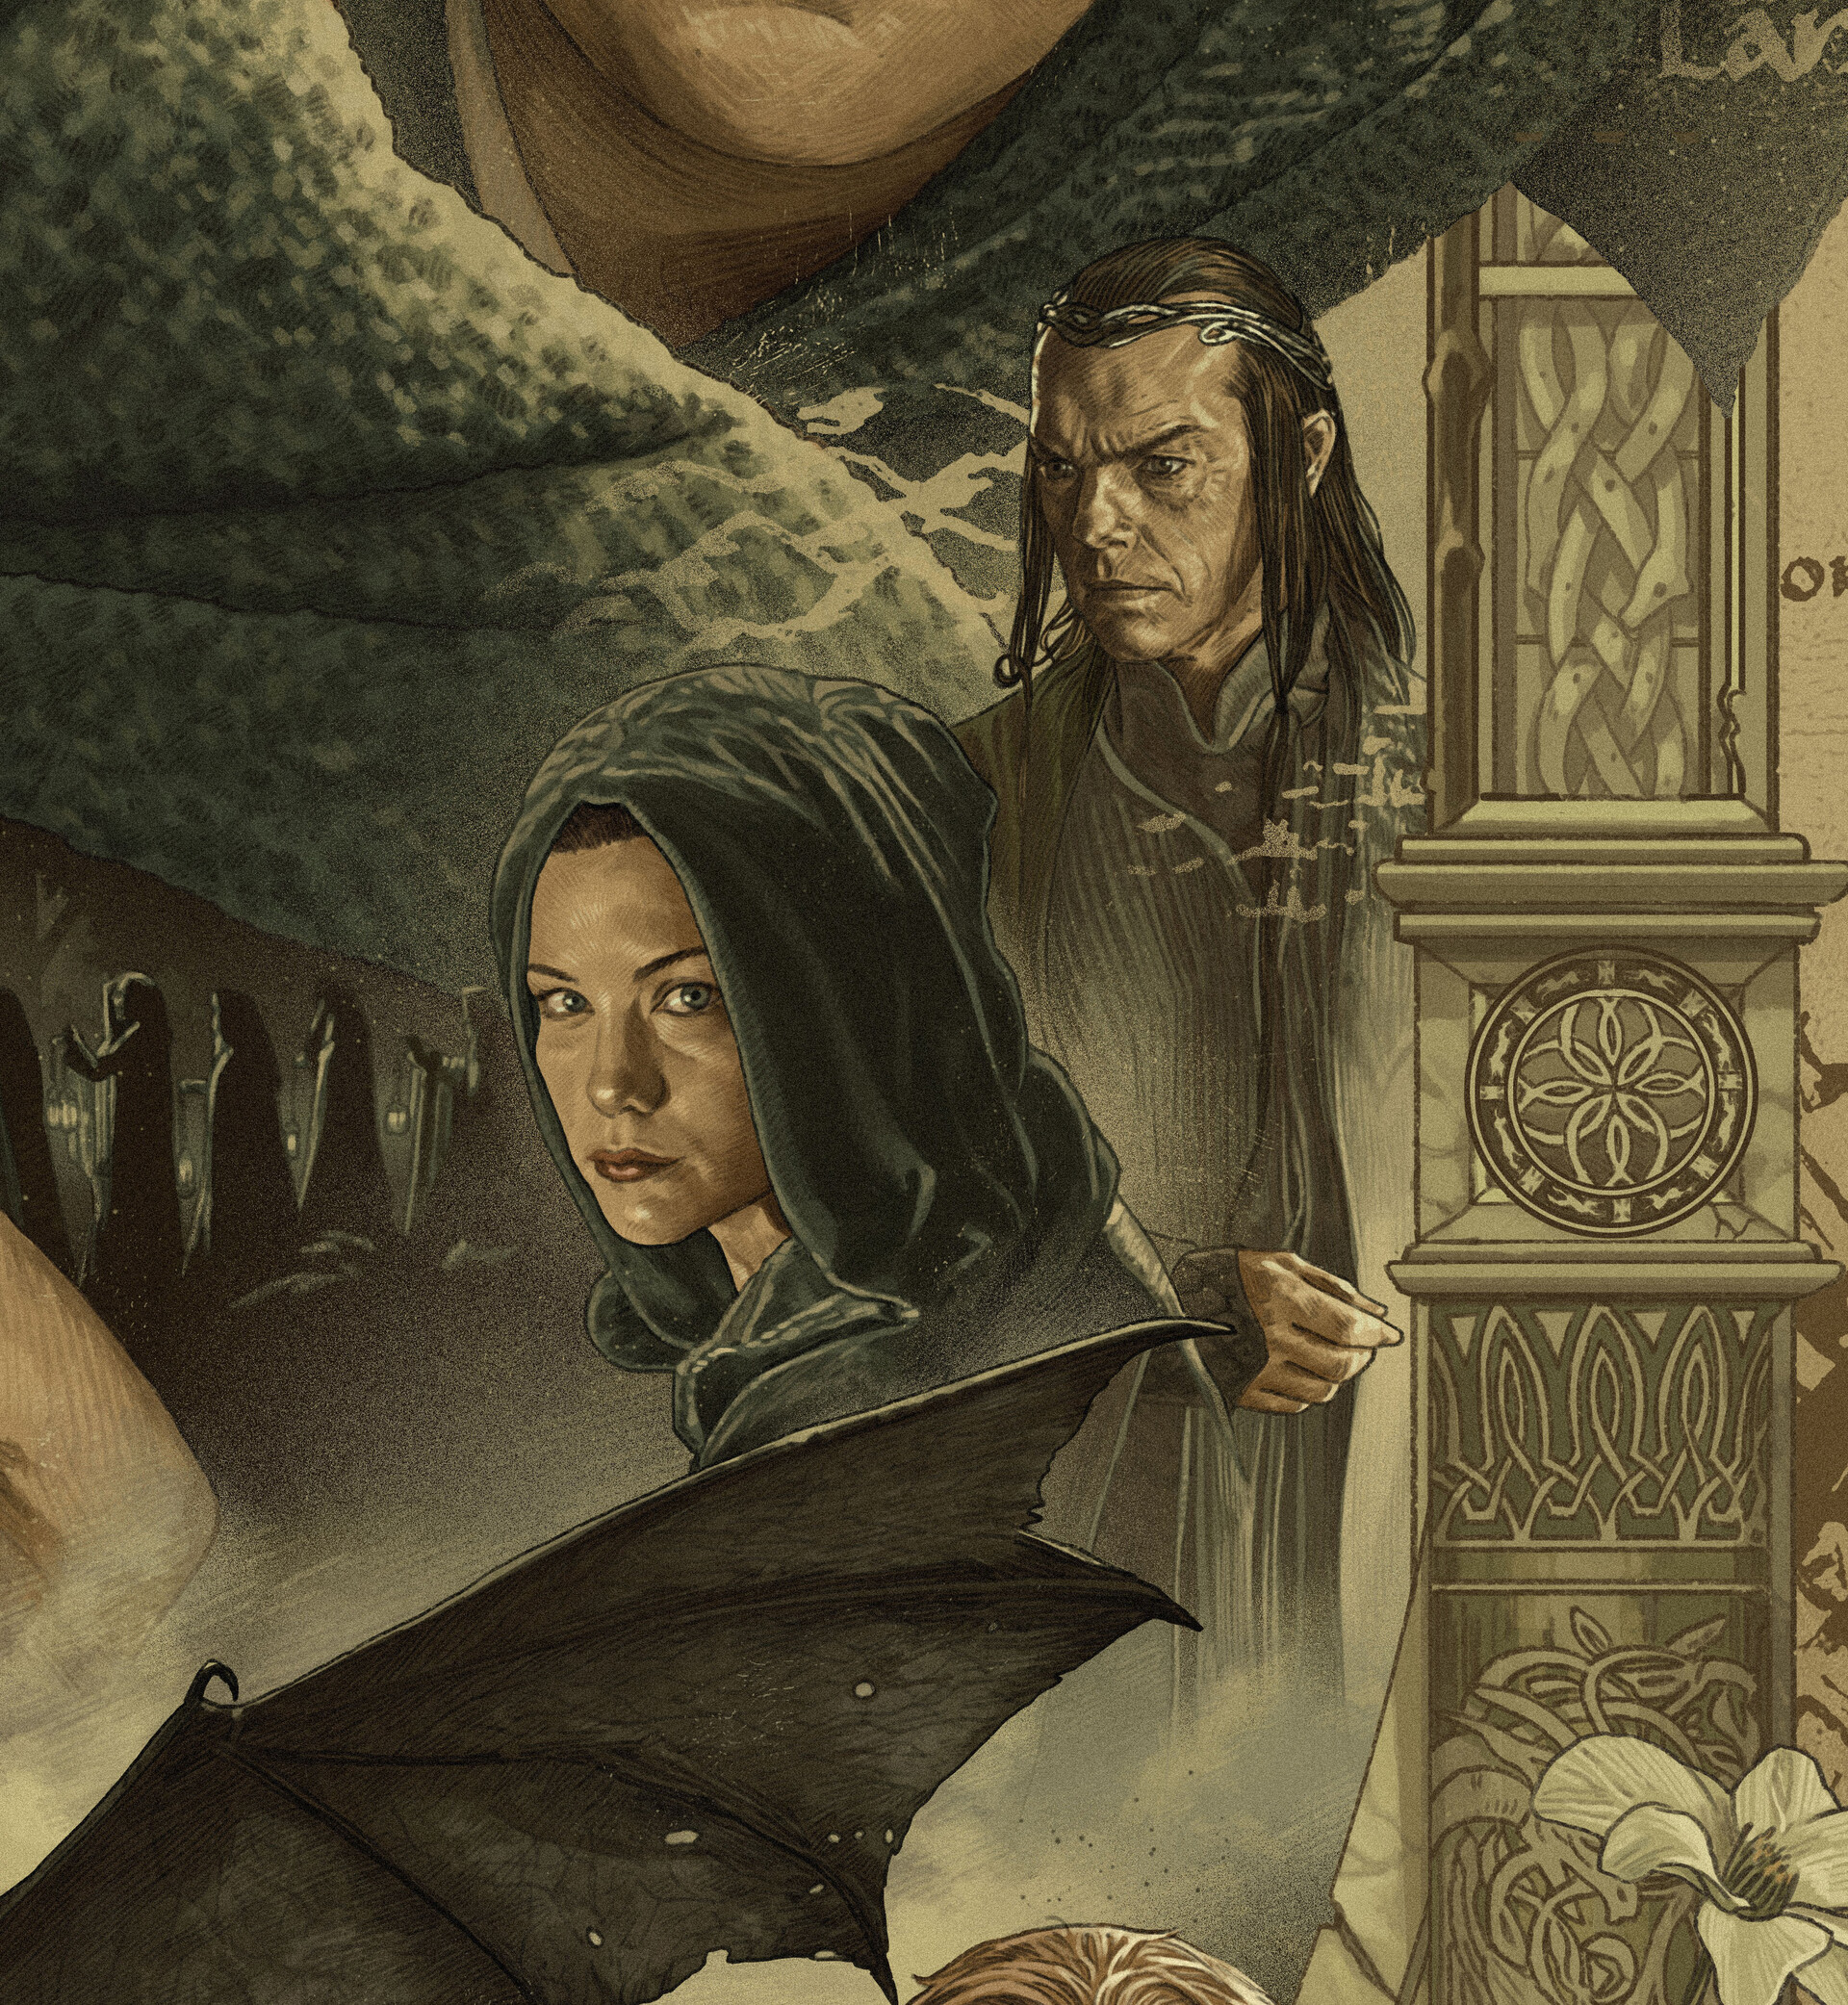 RUIZ BURGOS - THE LORD OF THE RINGS: THE FELLOWSHIP OF THE RING